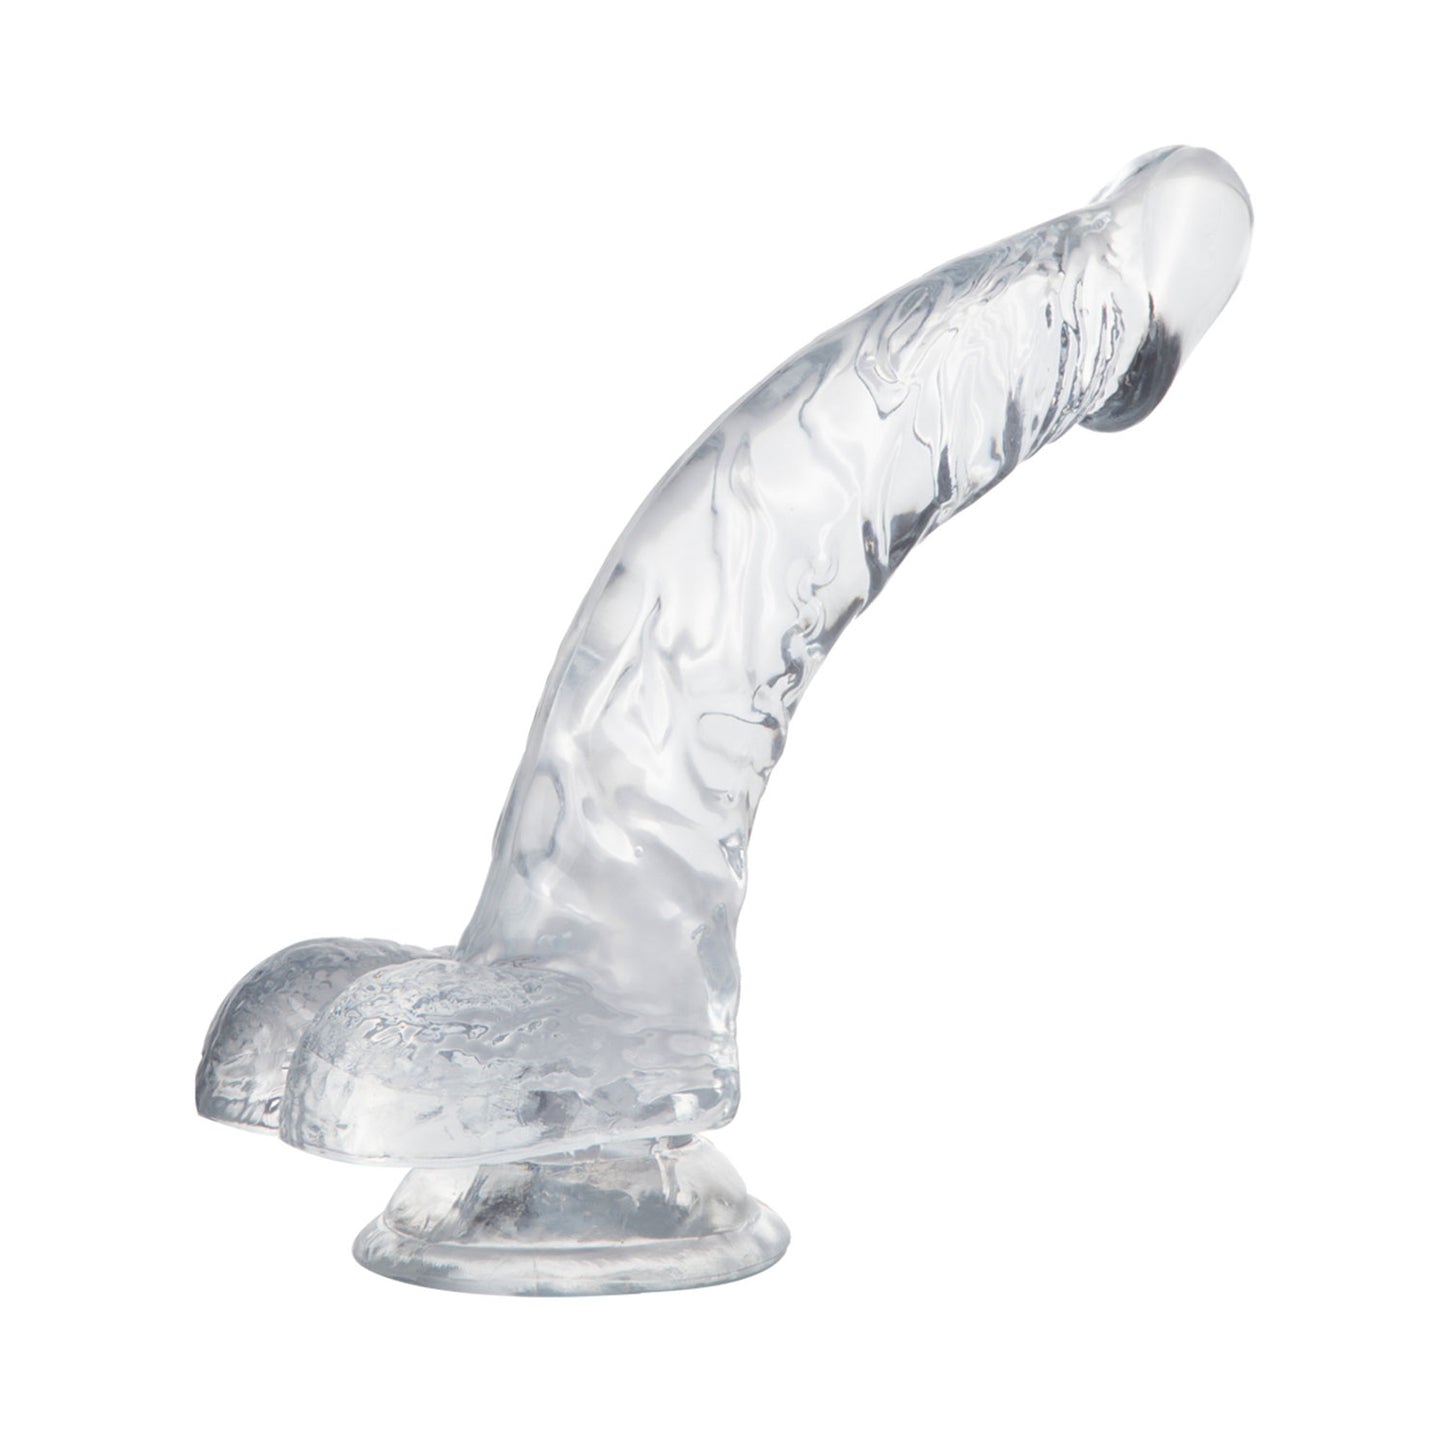 The Horny Company - No Frills Dildo 22cm Suction Cup Dong with Balls Clear